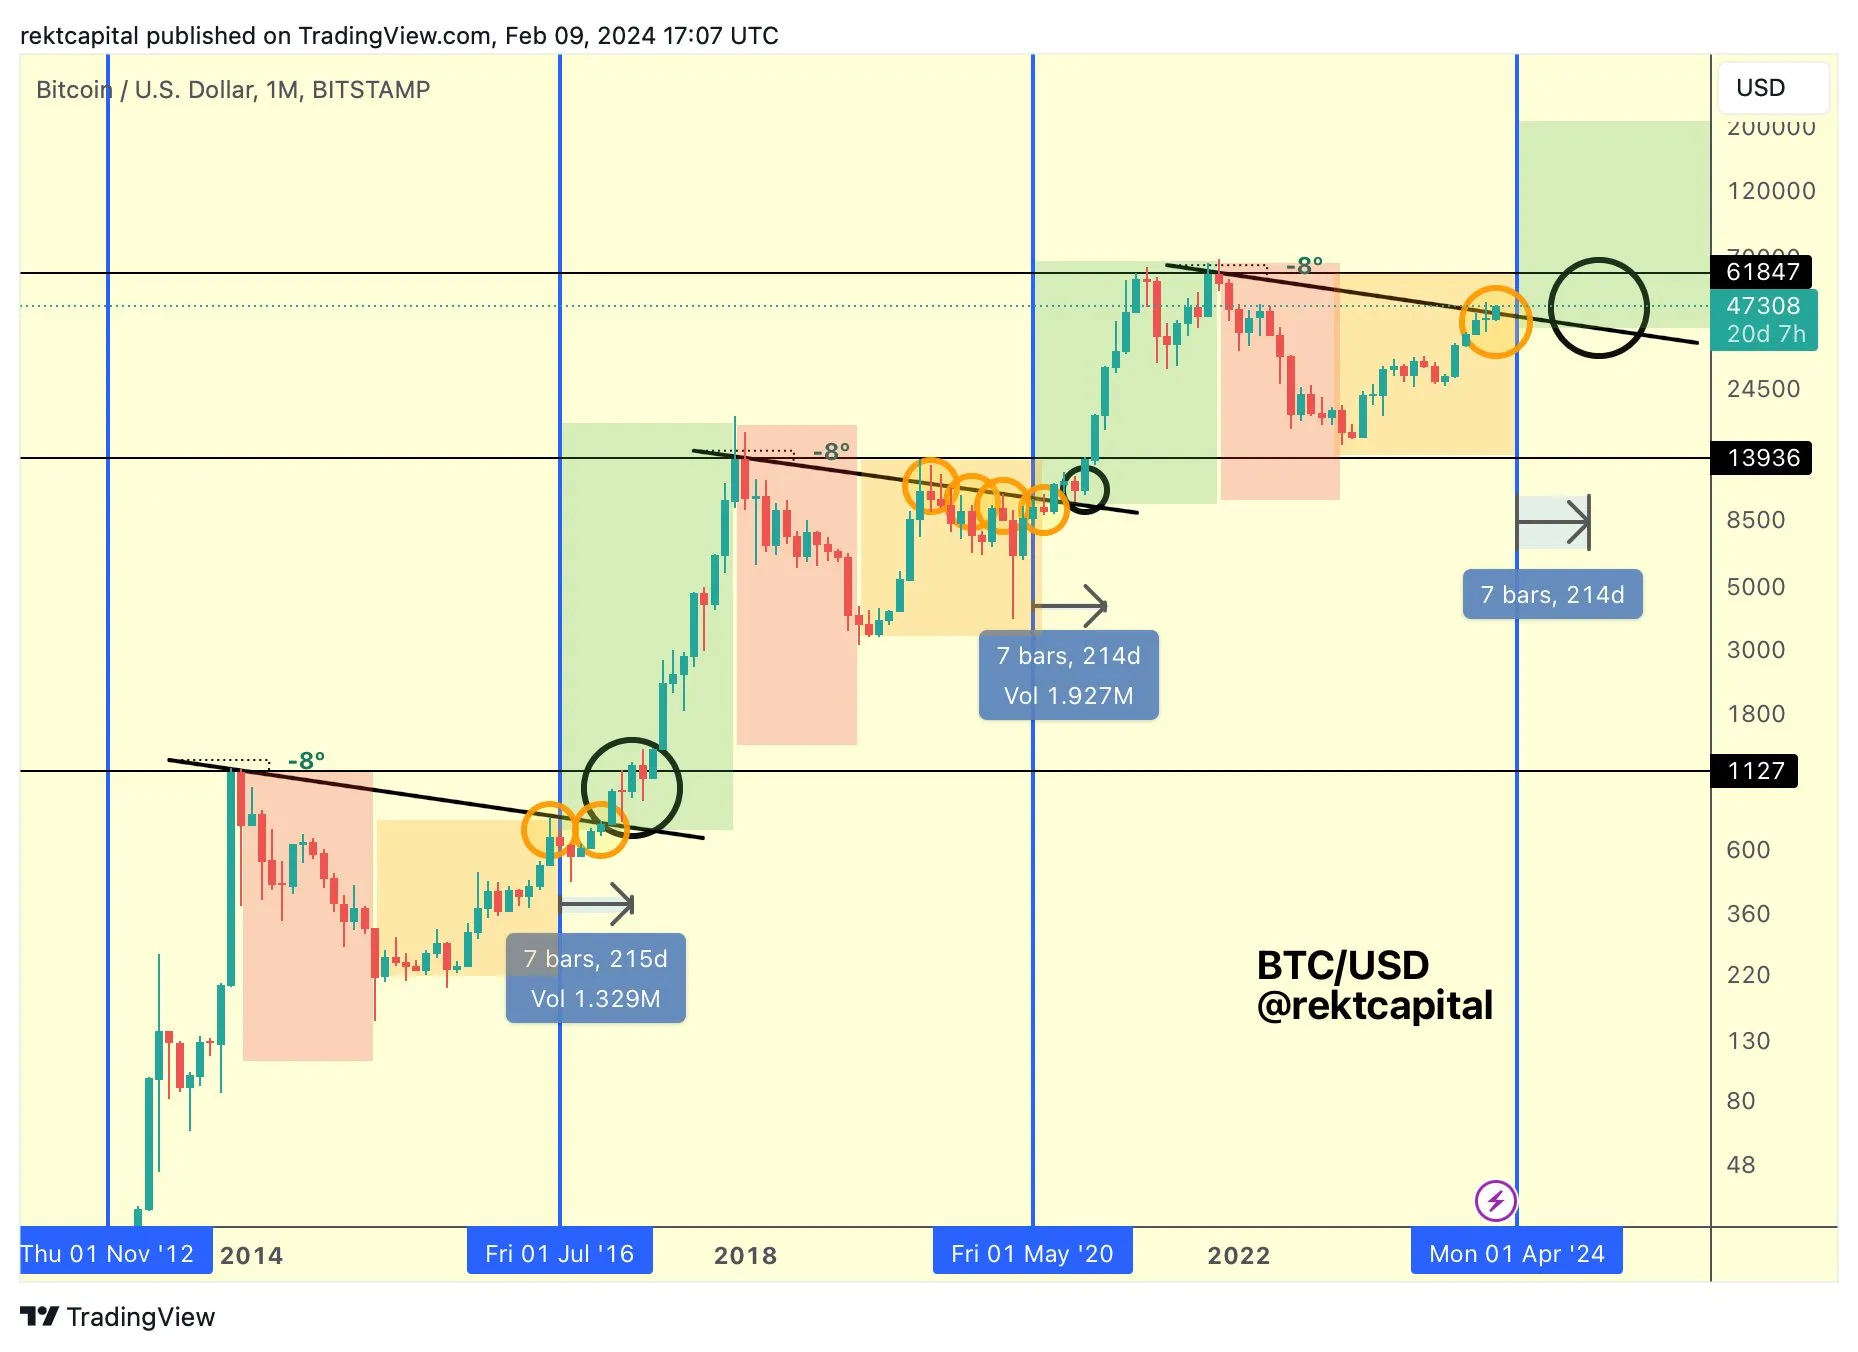 BTC’s attempt to consolidate above its macro-diagonal resistance usually leads to significant gains once fully broken.